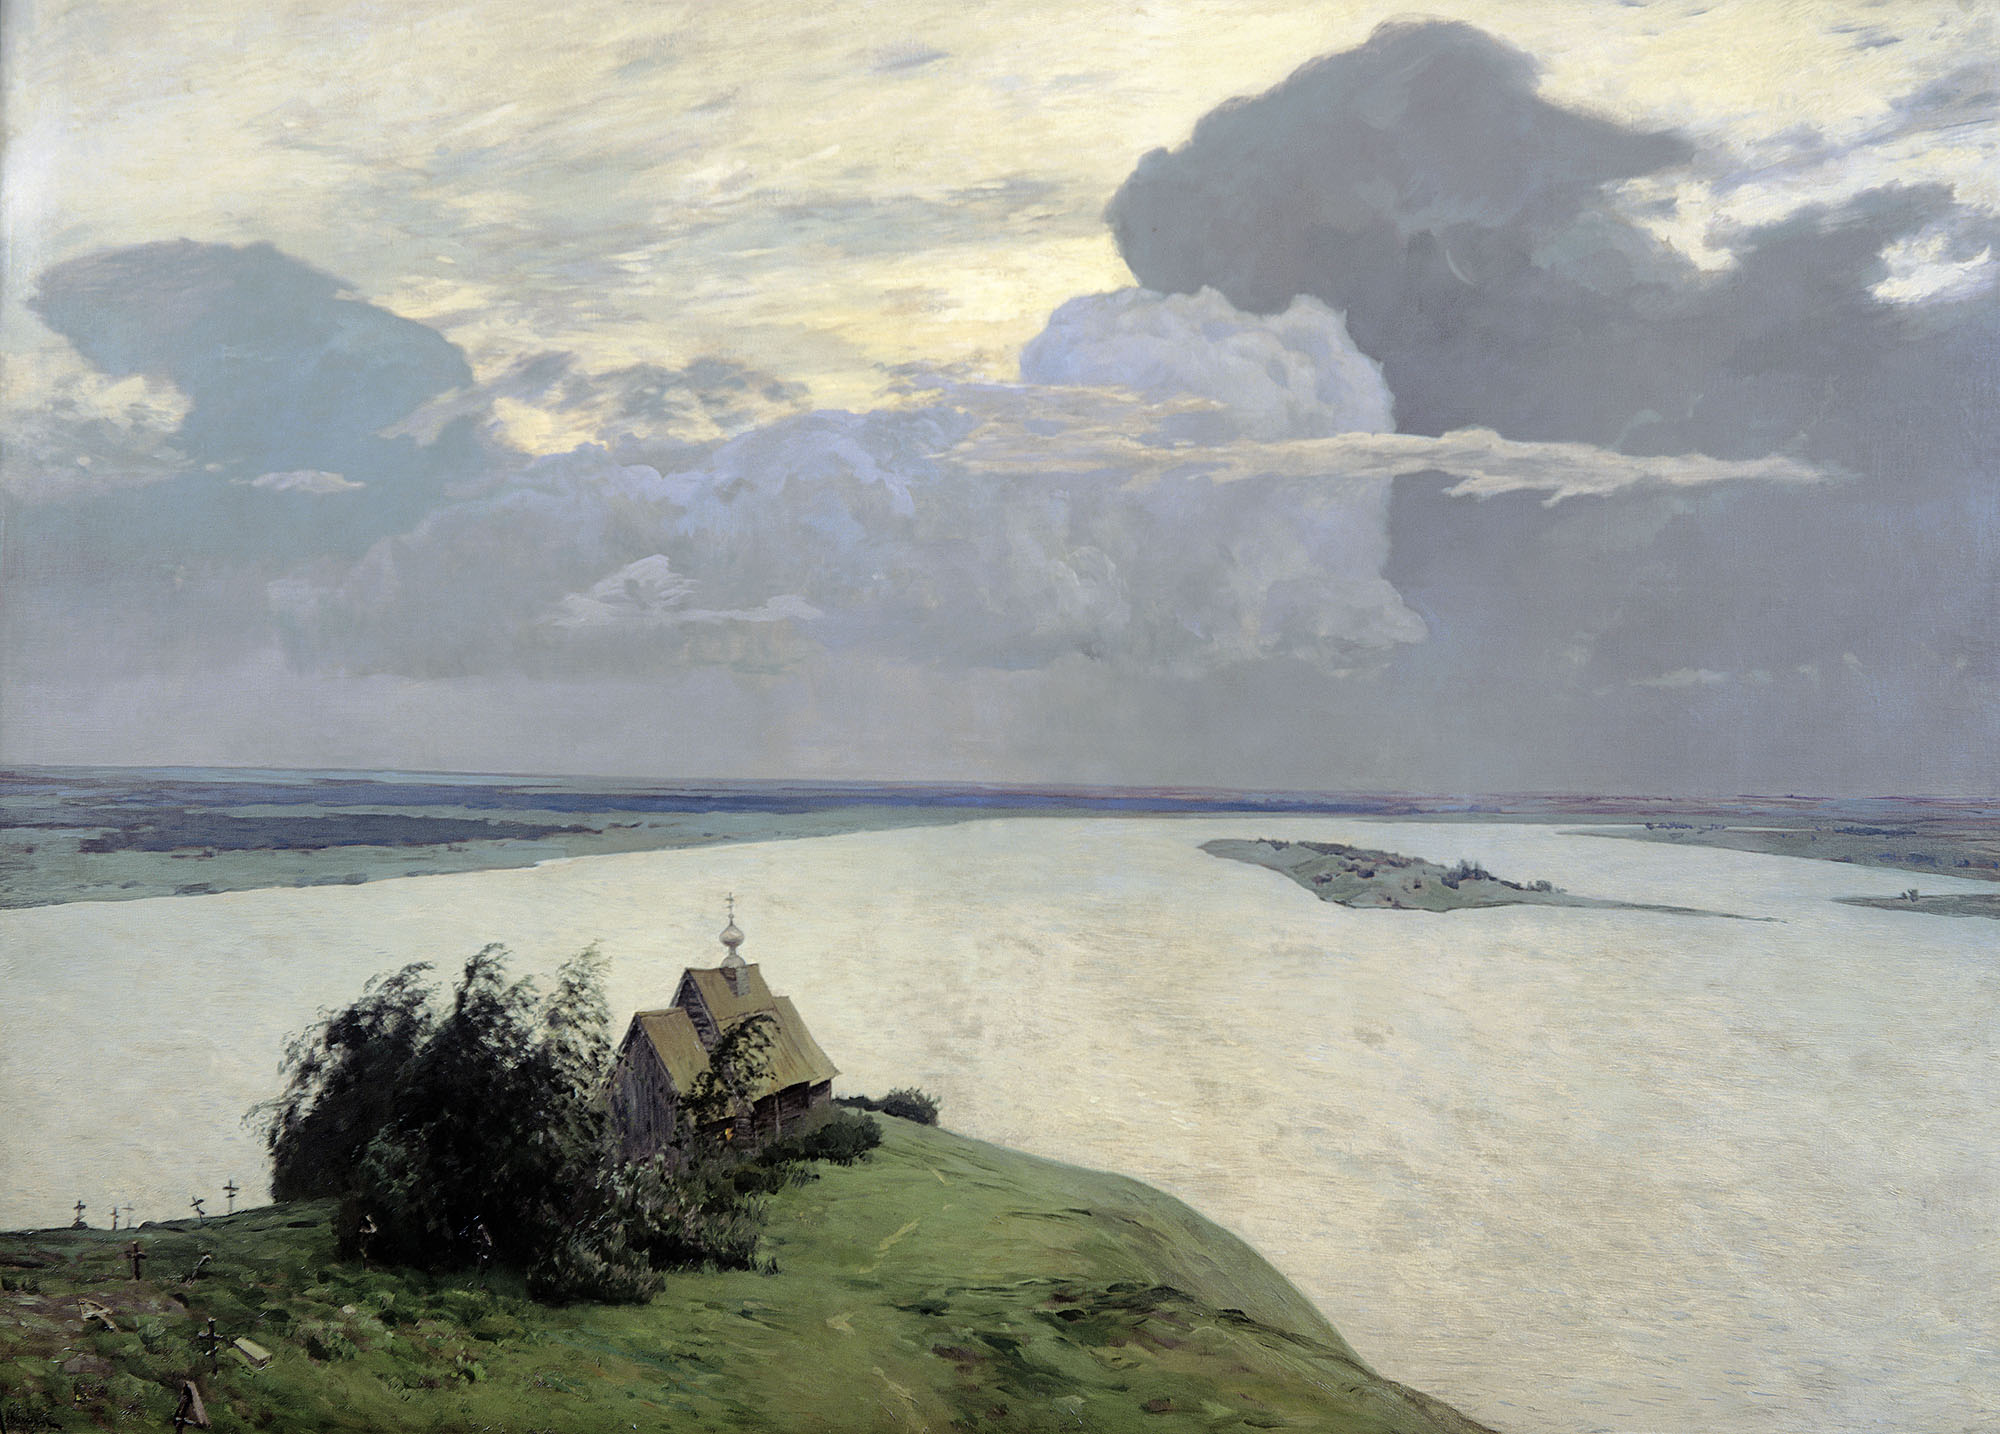 Isaac Levitan, Over Eternal Tranquility, 1898